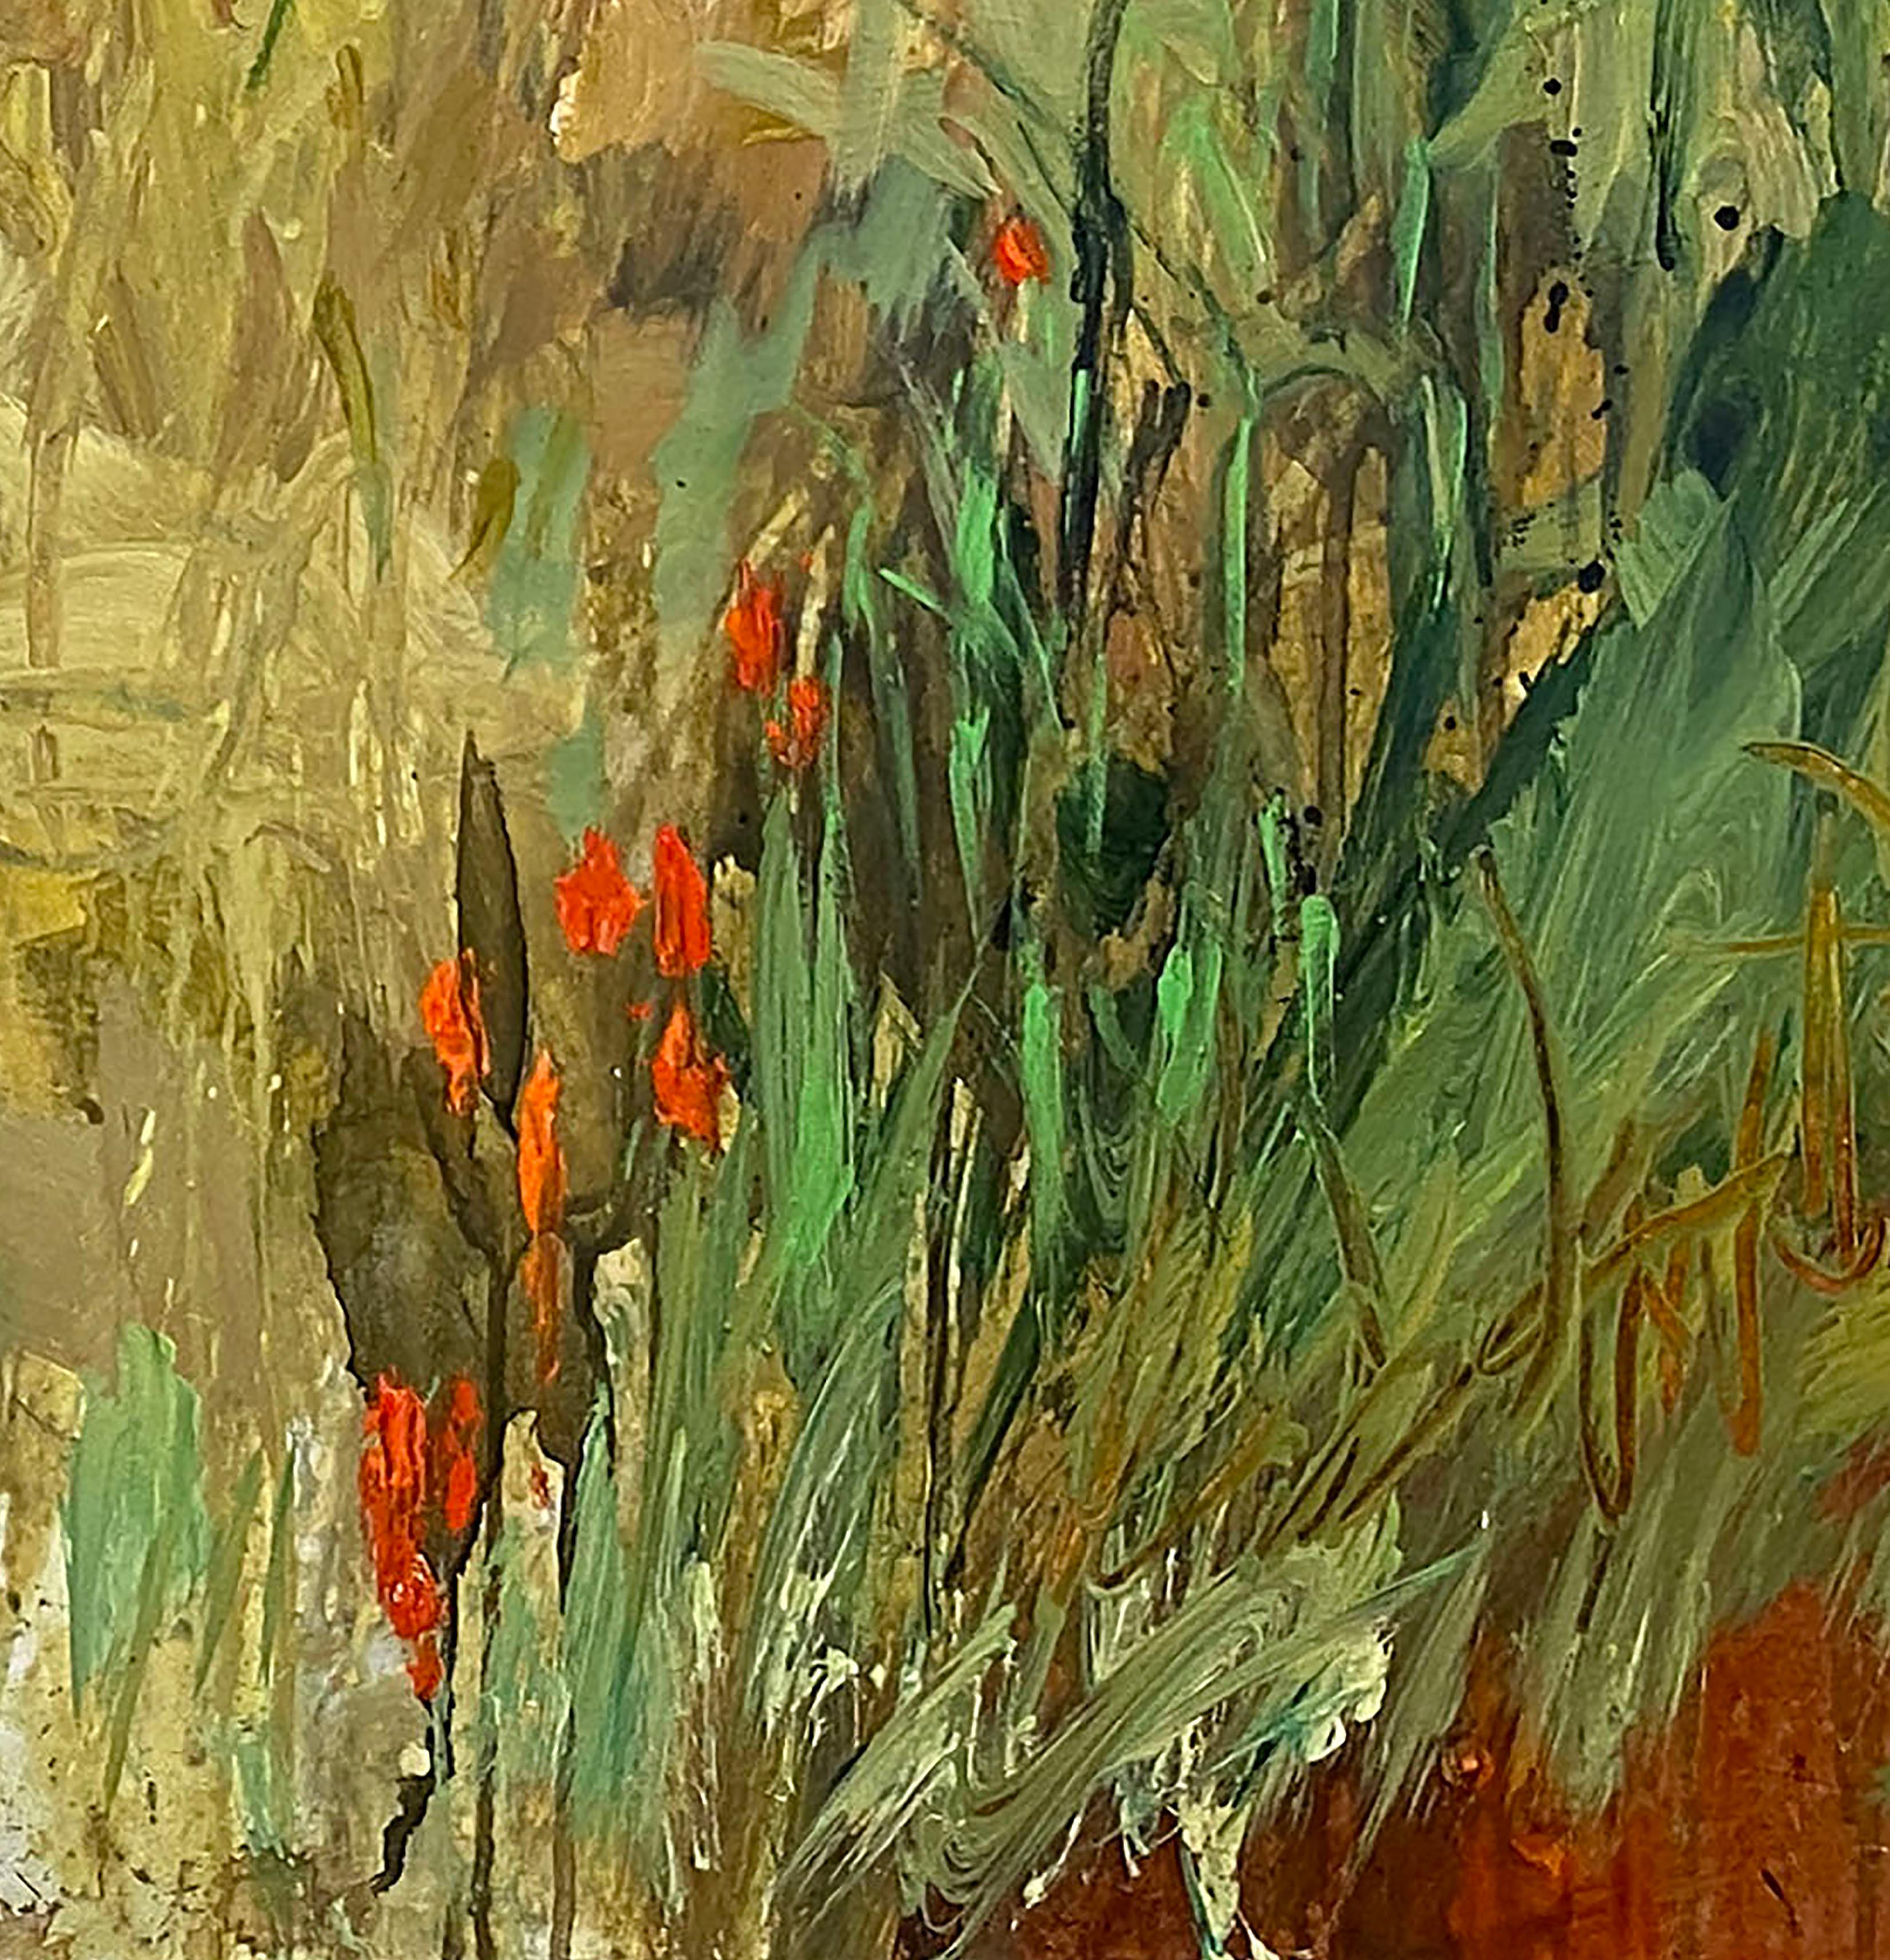 Descent (abstract, mtn hillside, lake, forest, wildflowers, green, gold, red) - Brown Abstract Painting by Allison Stewart